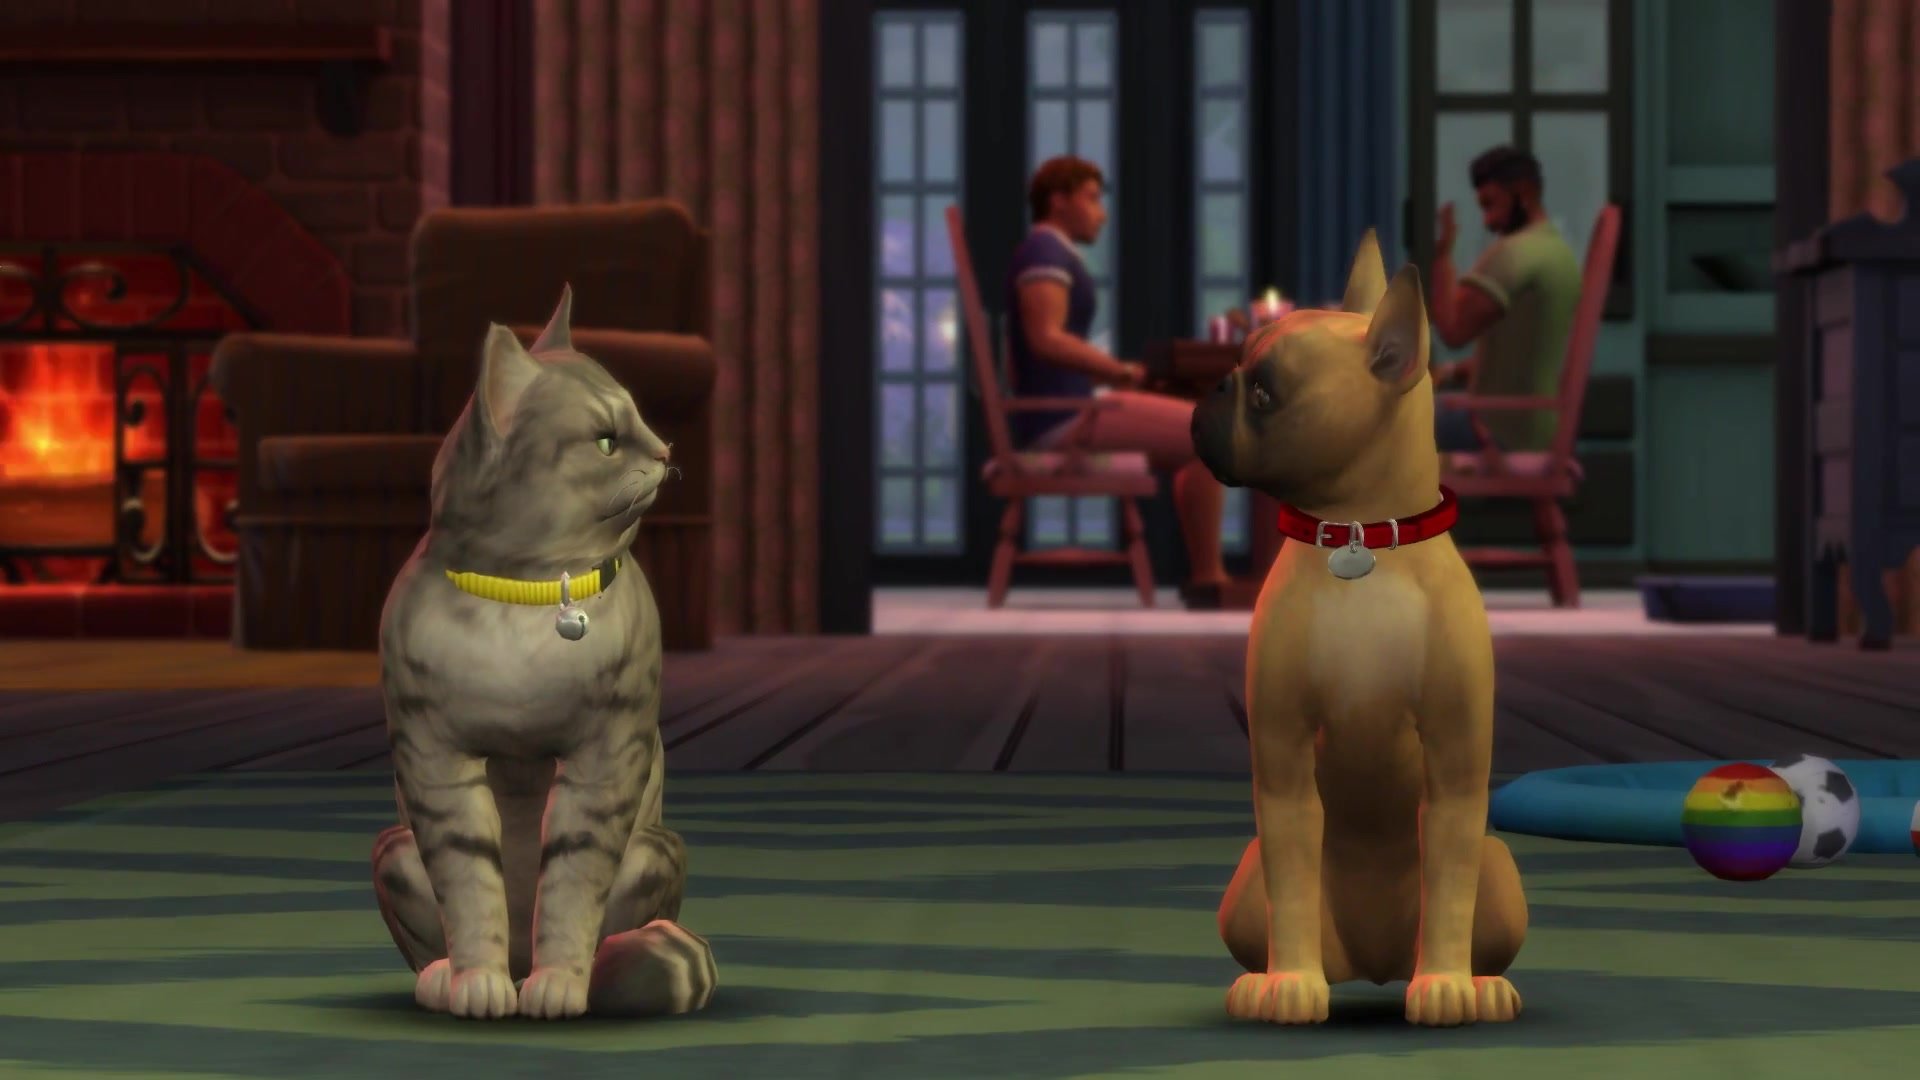 Cat in a dogs world. The SIMS 4. кошки и собаки. SIMS 4 собаки. Симс 4 кошка. Симс 4 кошки и собаки.